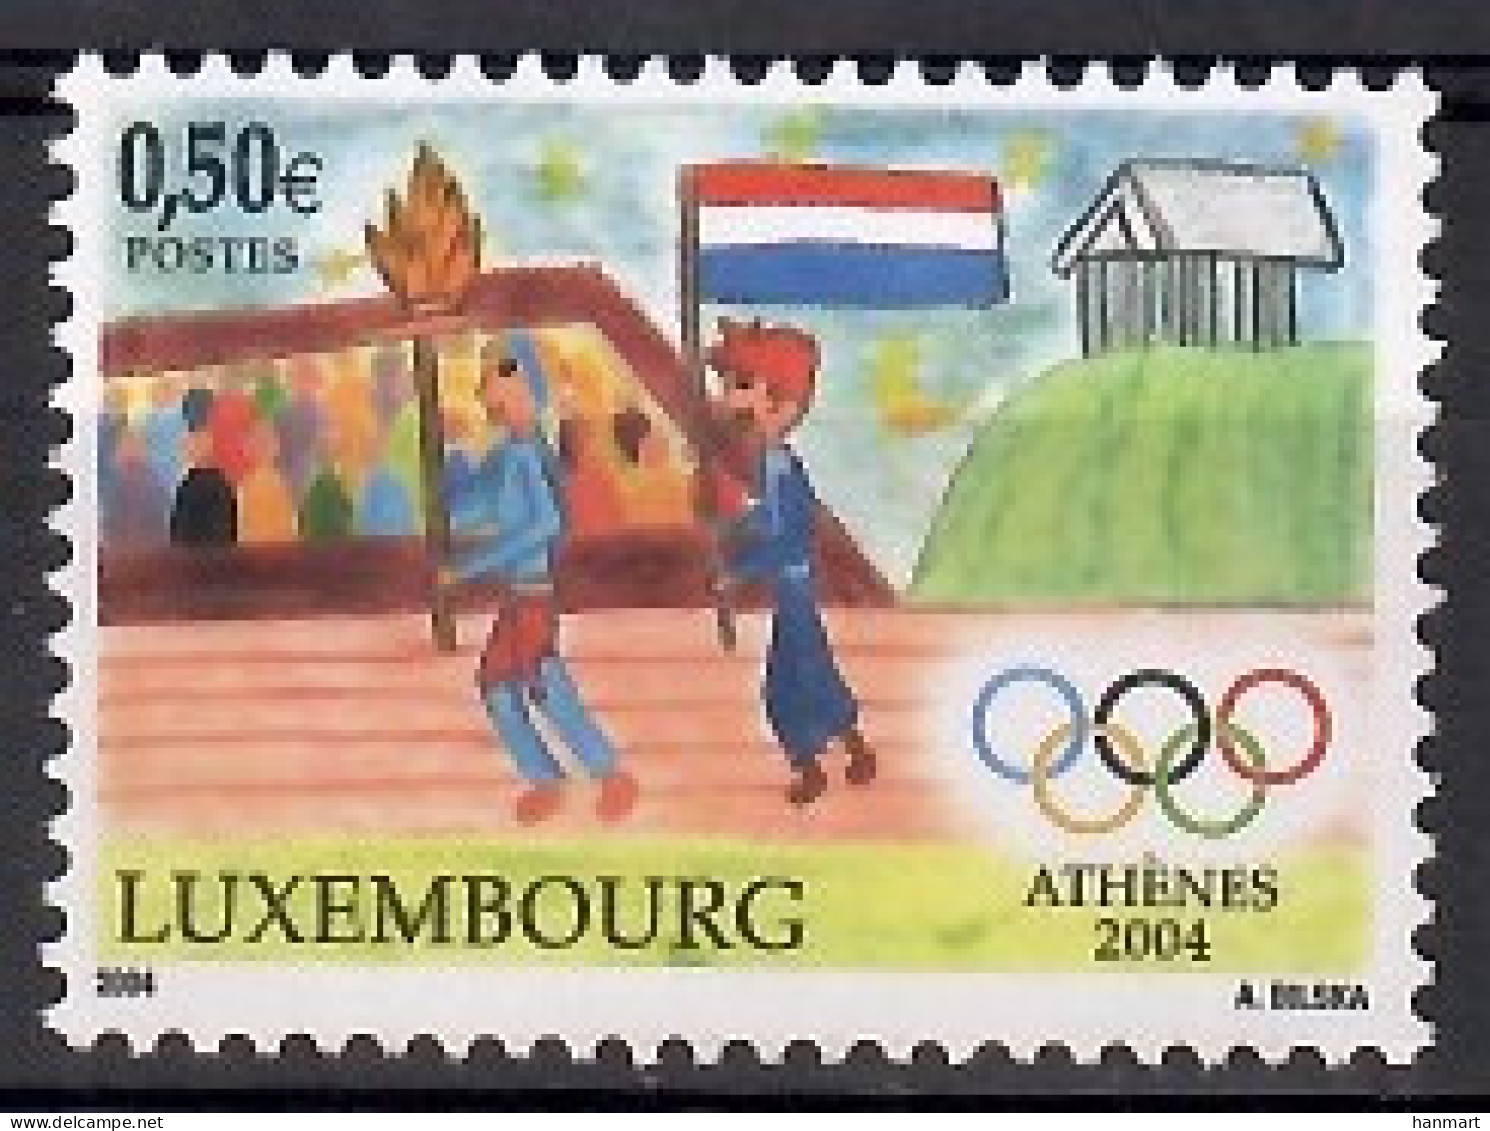 Luxembourg 2004 Mi 1642 MNH  (LZE3 LXB1642) - Sommer 2004: Athen